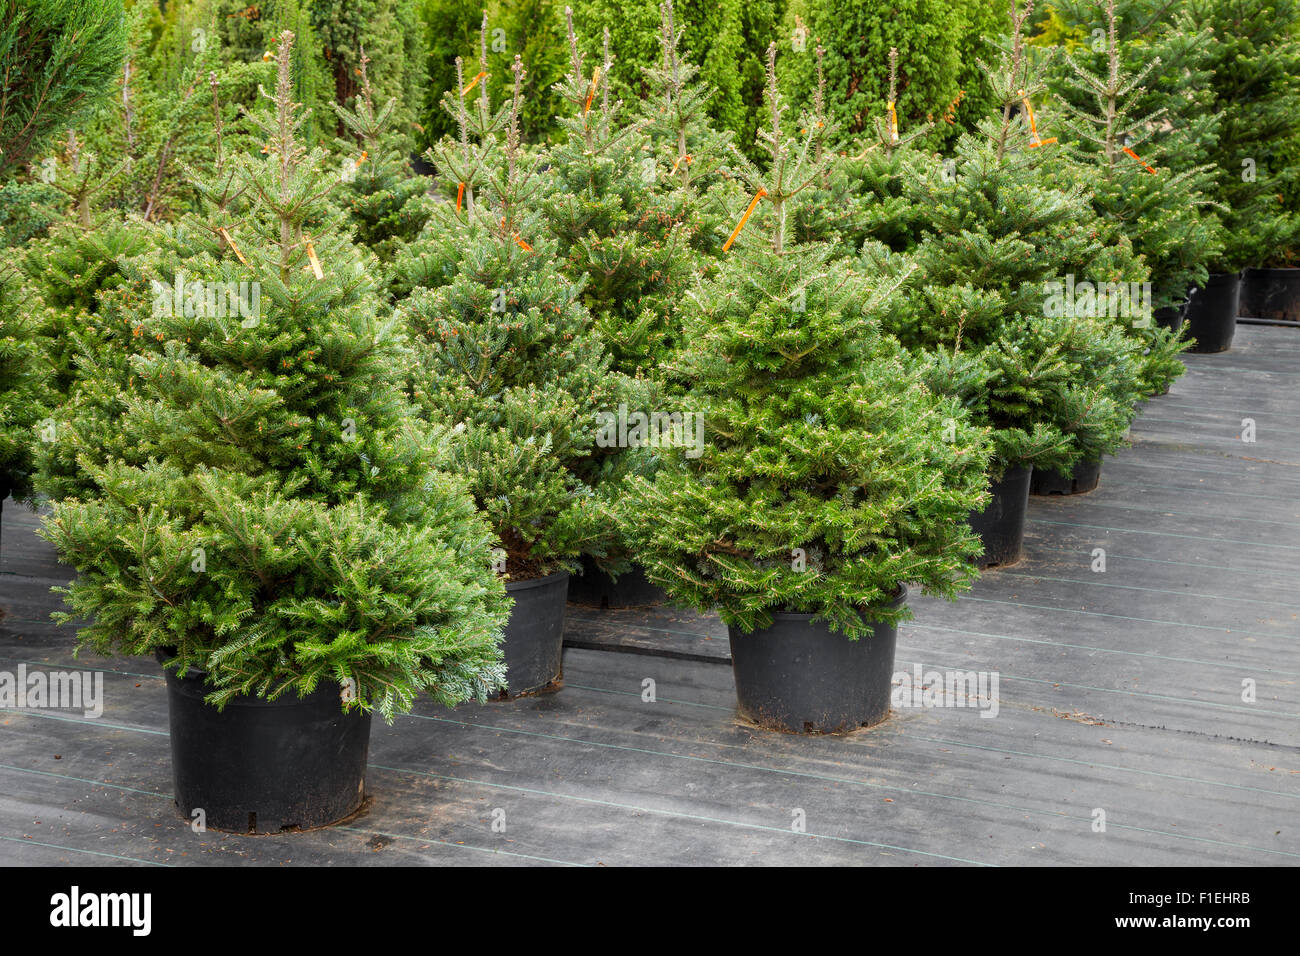 Christmas trees in pots for sale Stock Photo